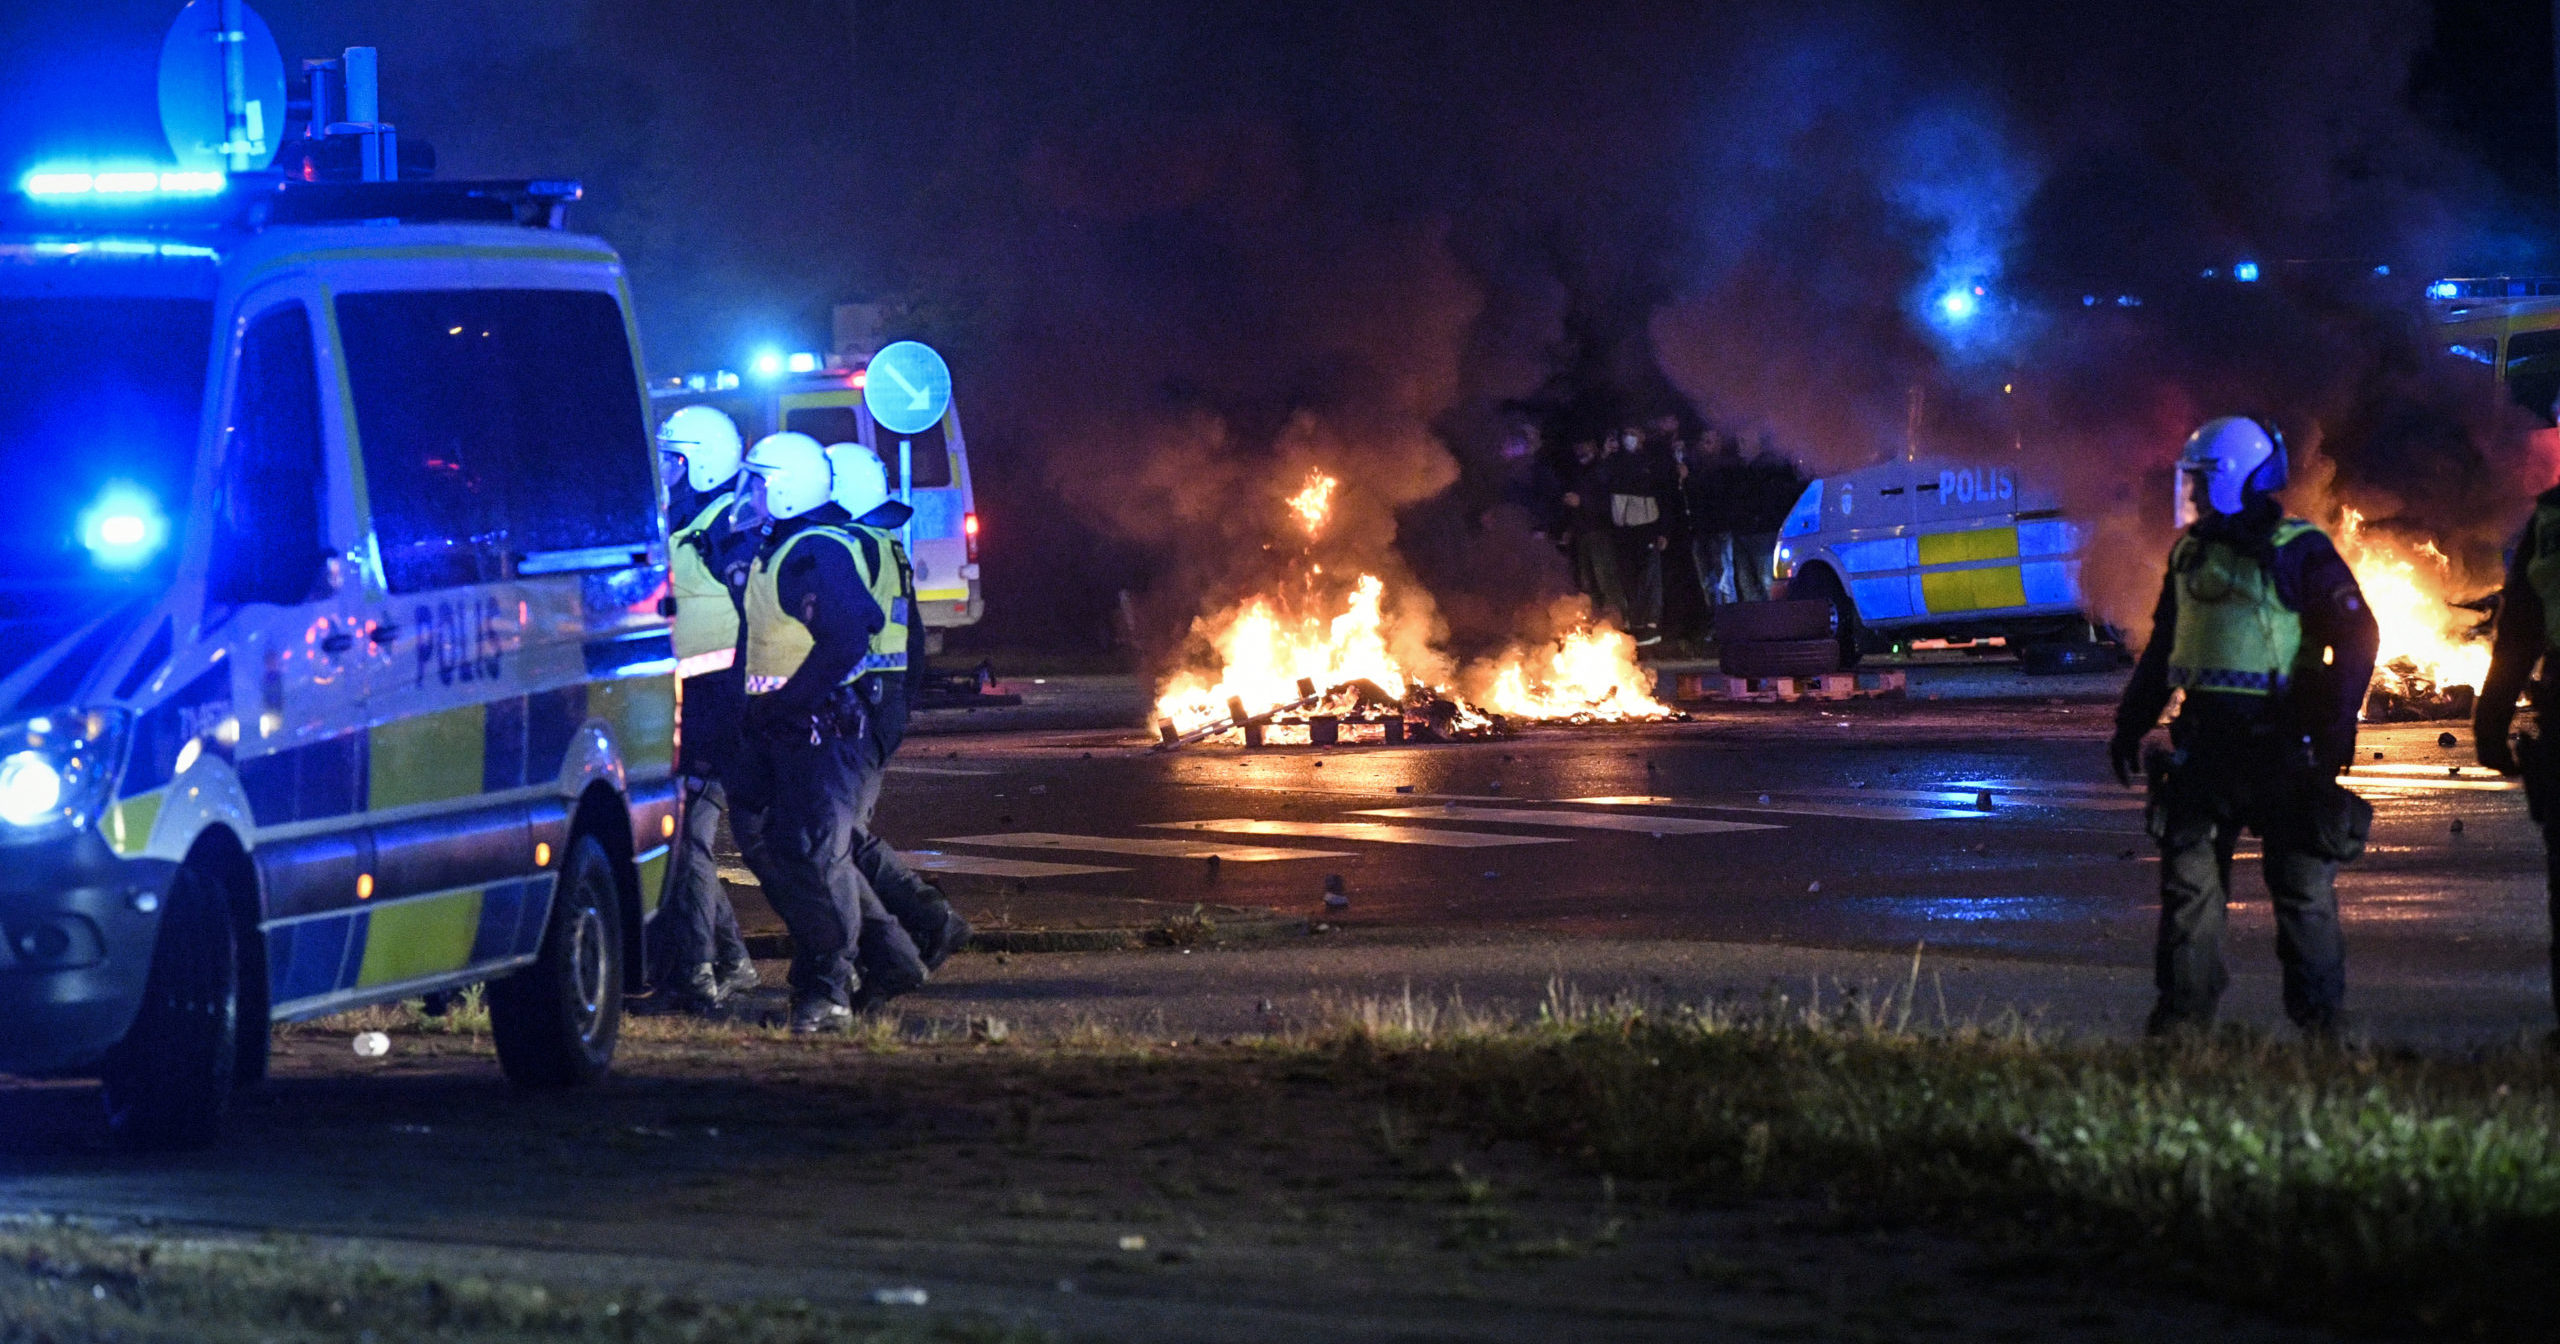 Police are seen as several hundred people riot in Sweden on Aug. 28, 2020. Activists burned a Quran in the southern Swedish city of Malmo, sparking riots and unrest after more than 300 people gathered to protest.